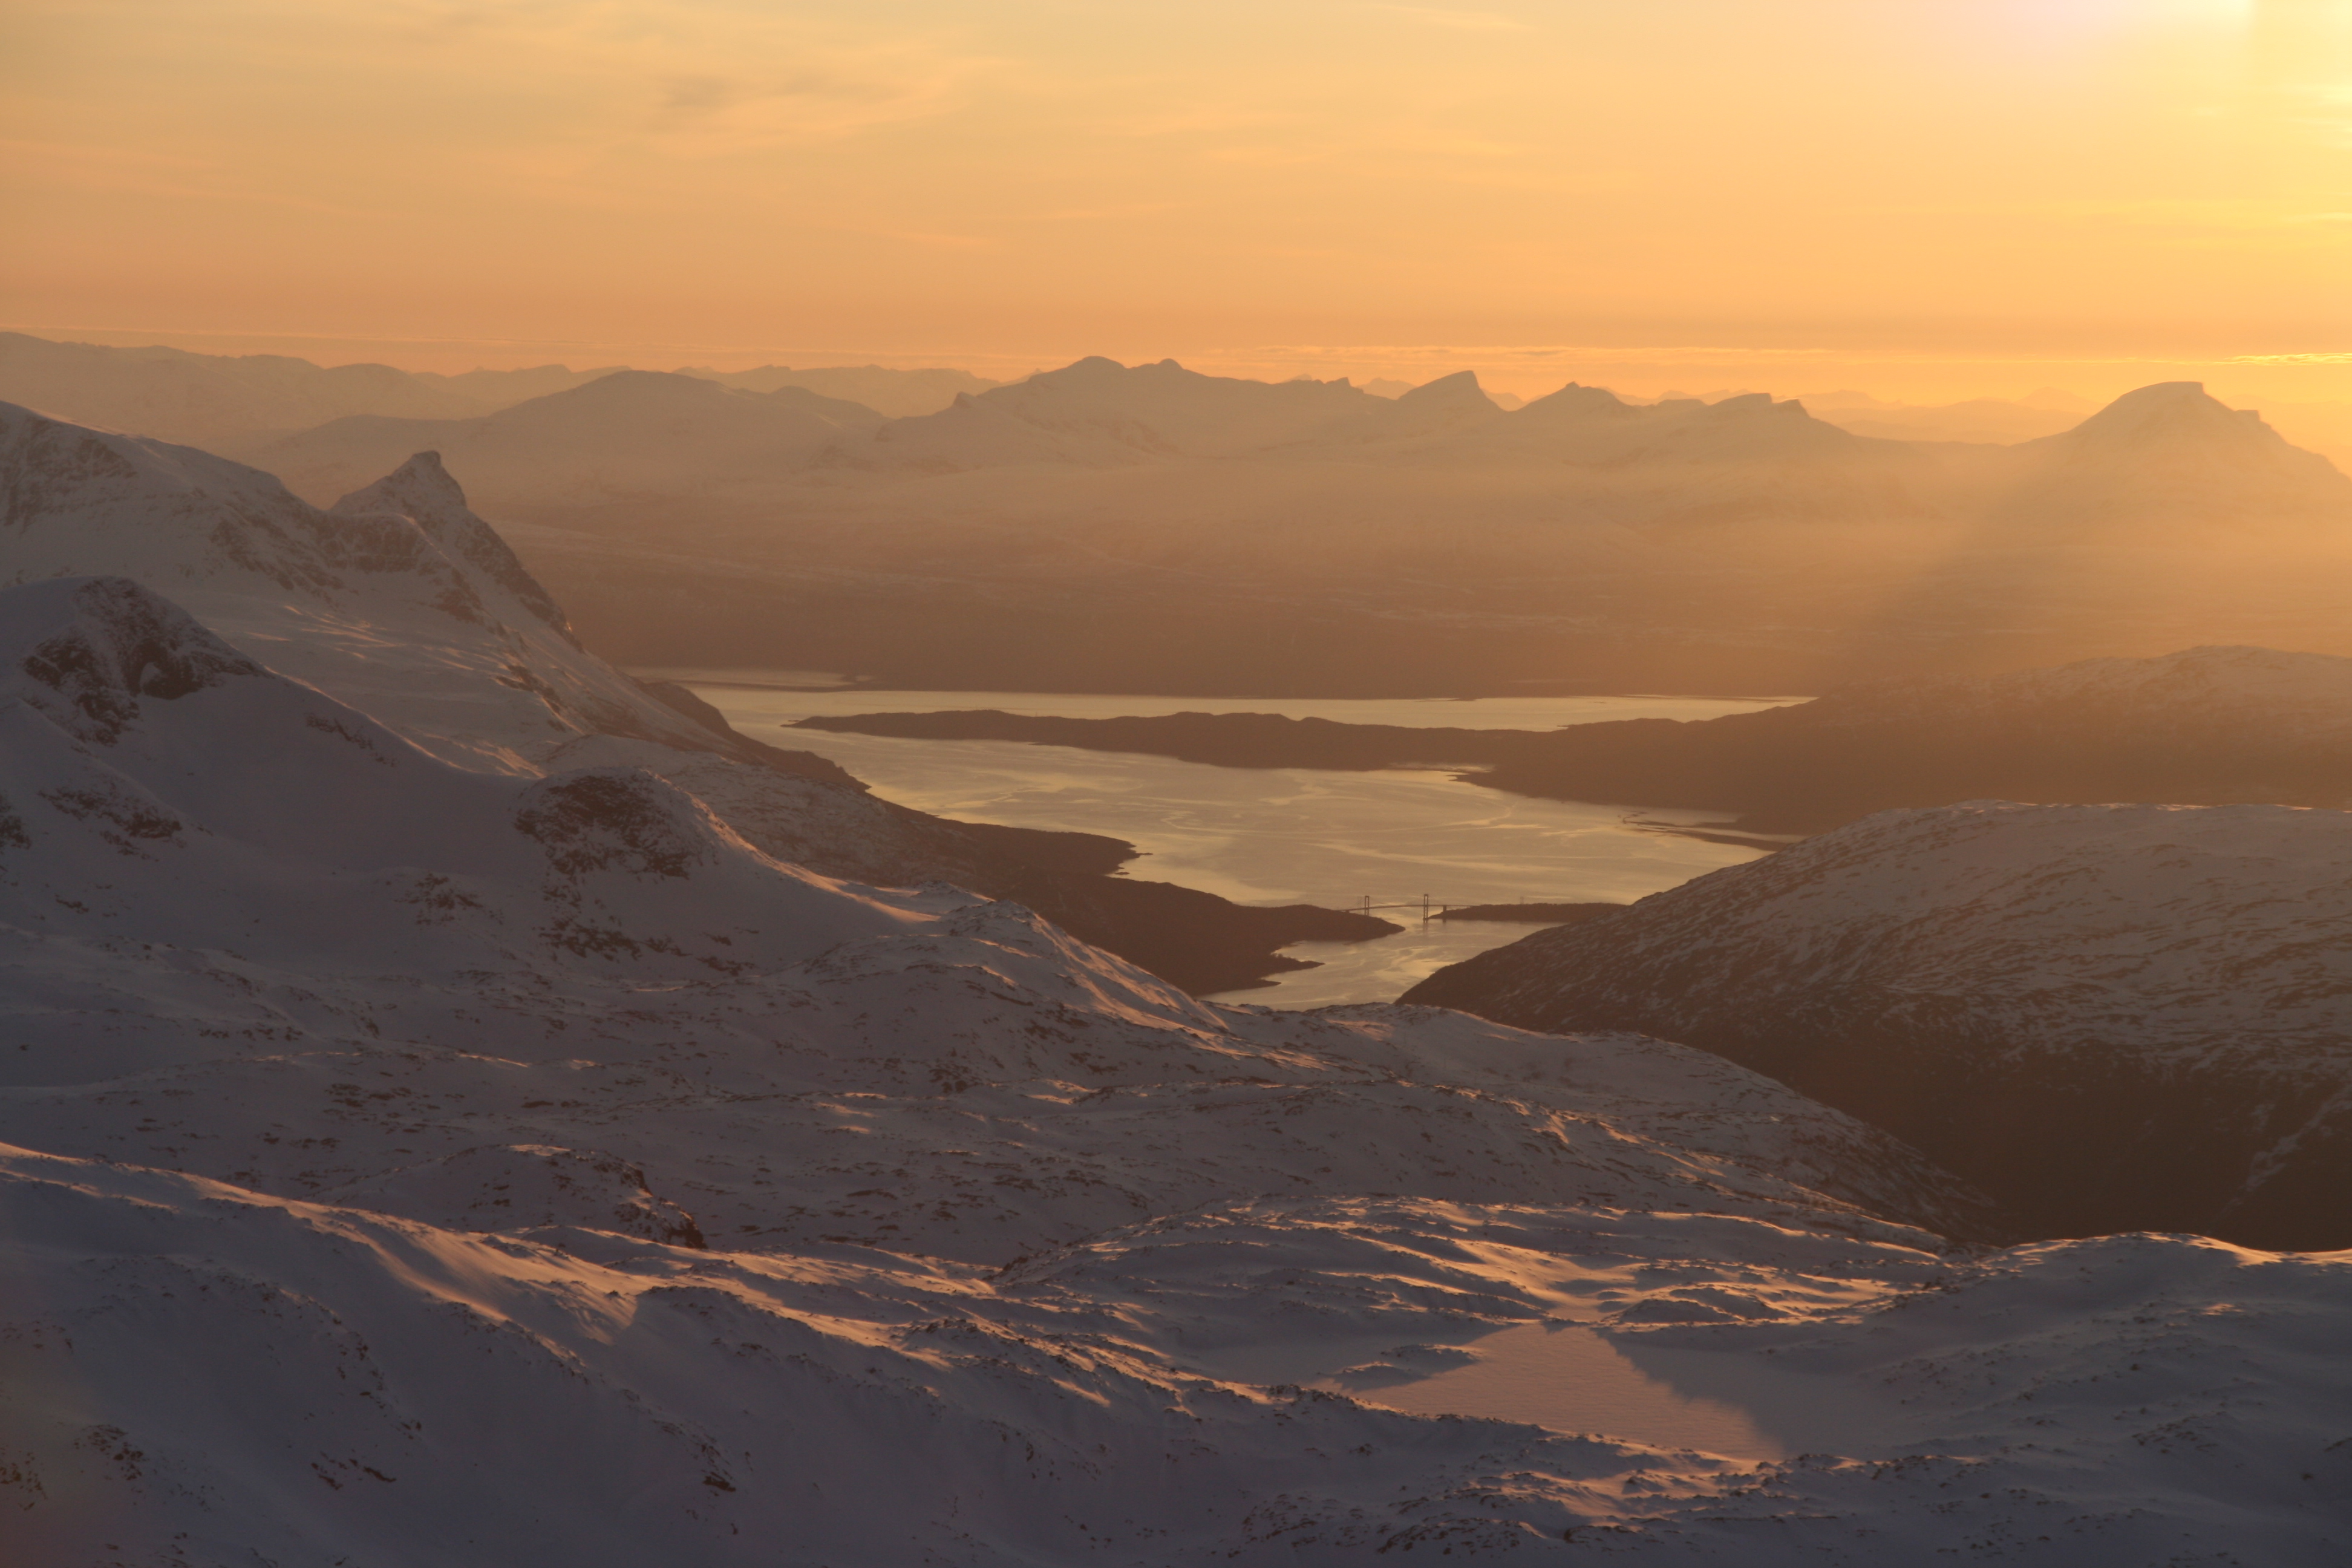 Evening light over the Rombackfjord on our way home. Heliski Riksgrnsen April 29, 2009. Photo: Andreas Bengtsson